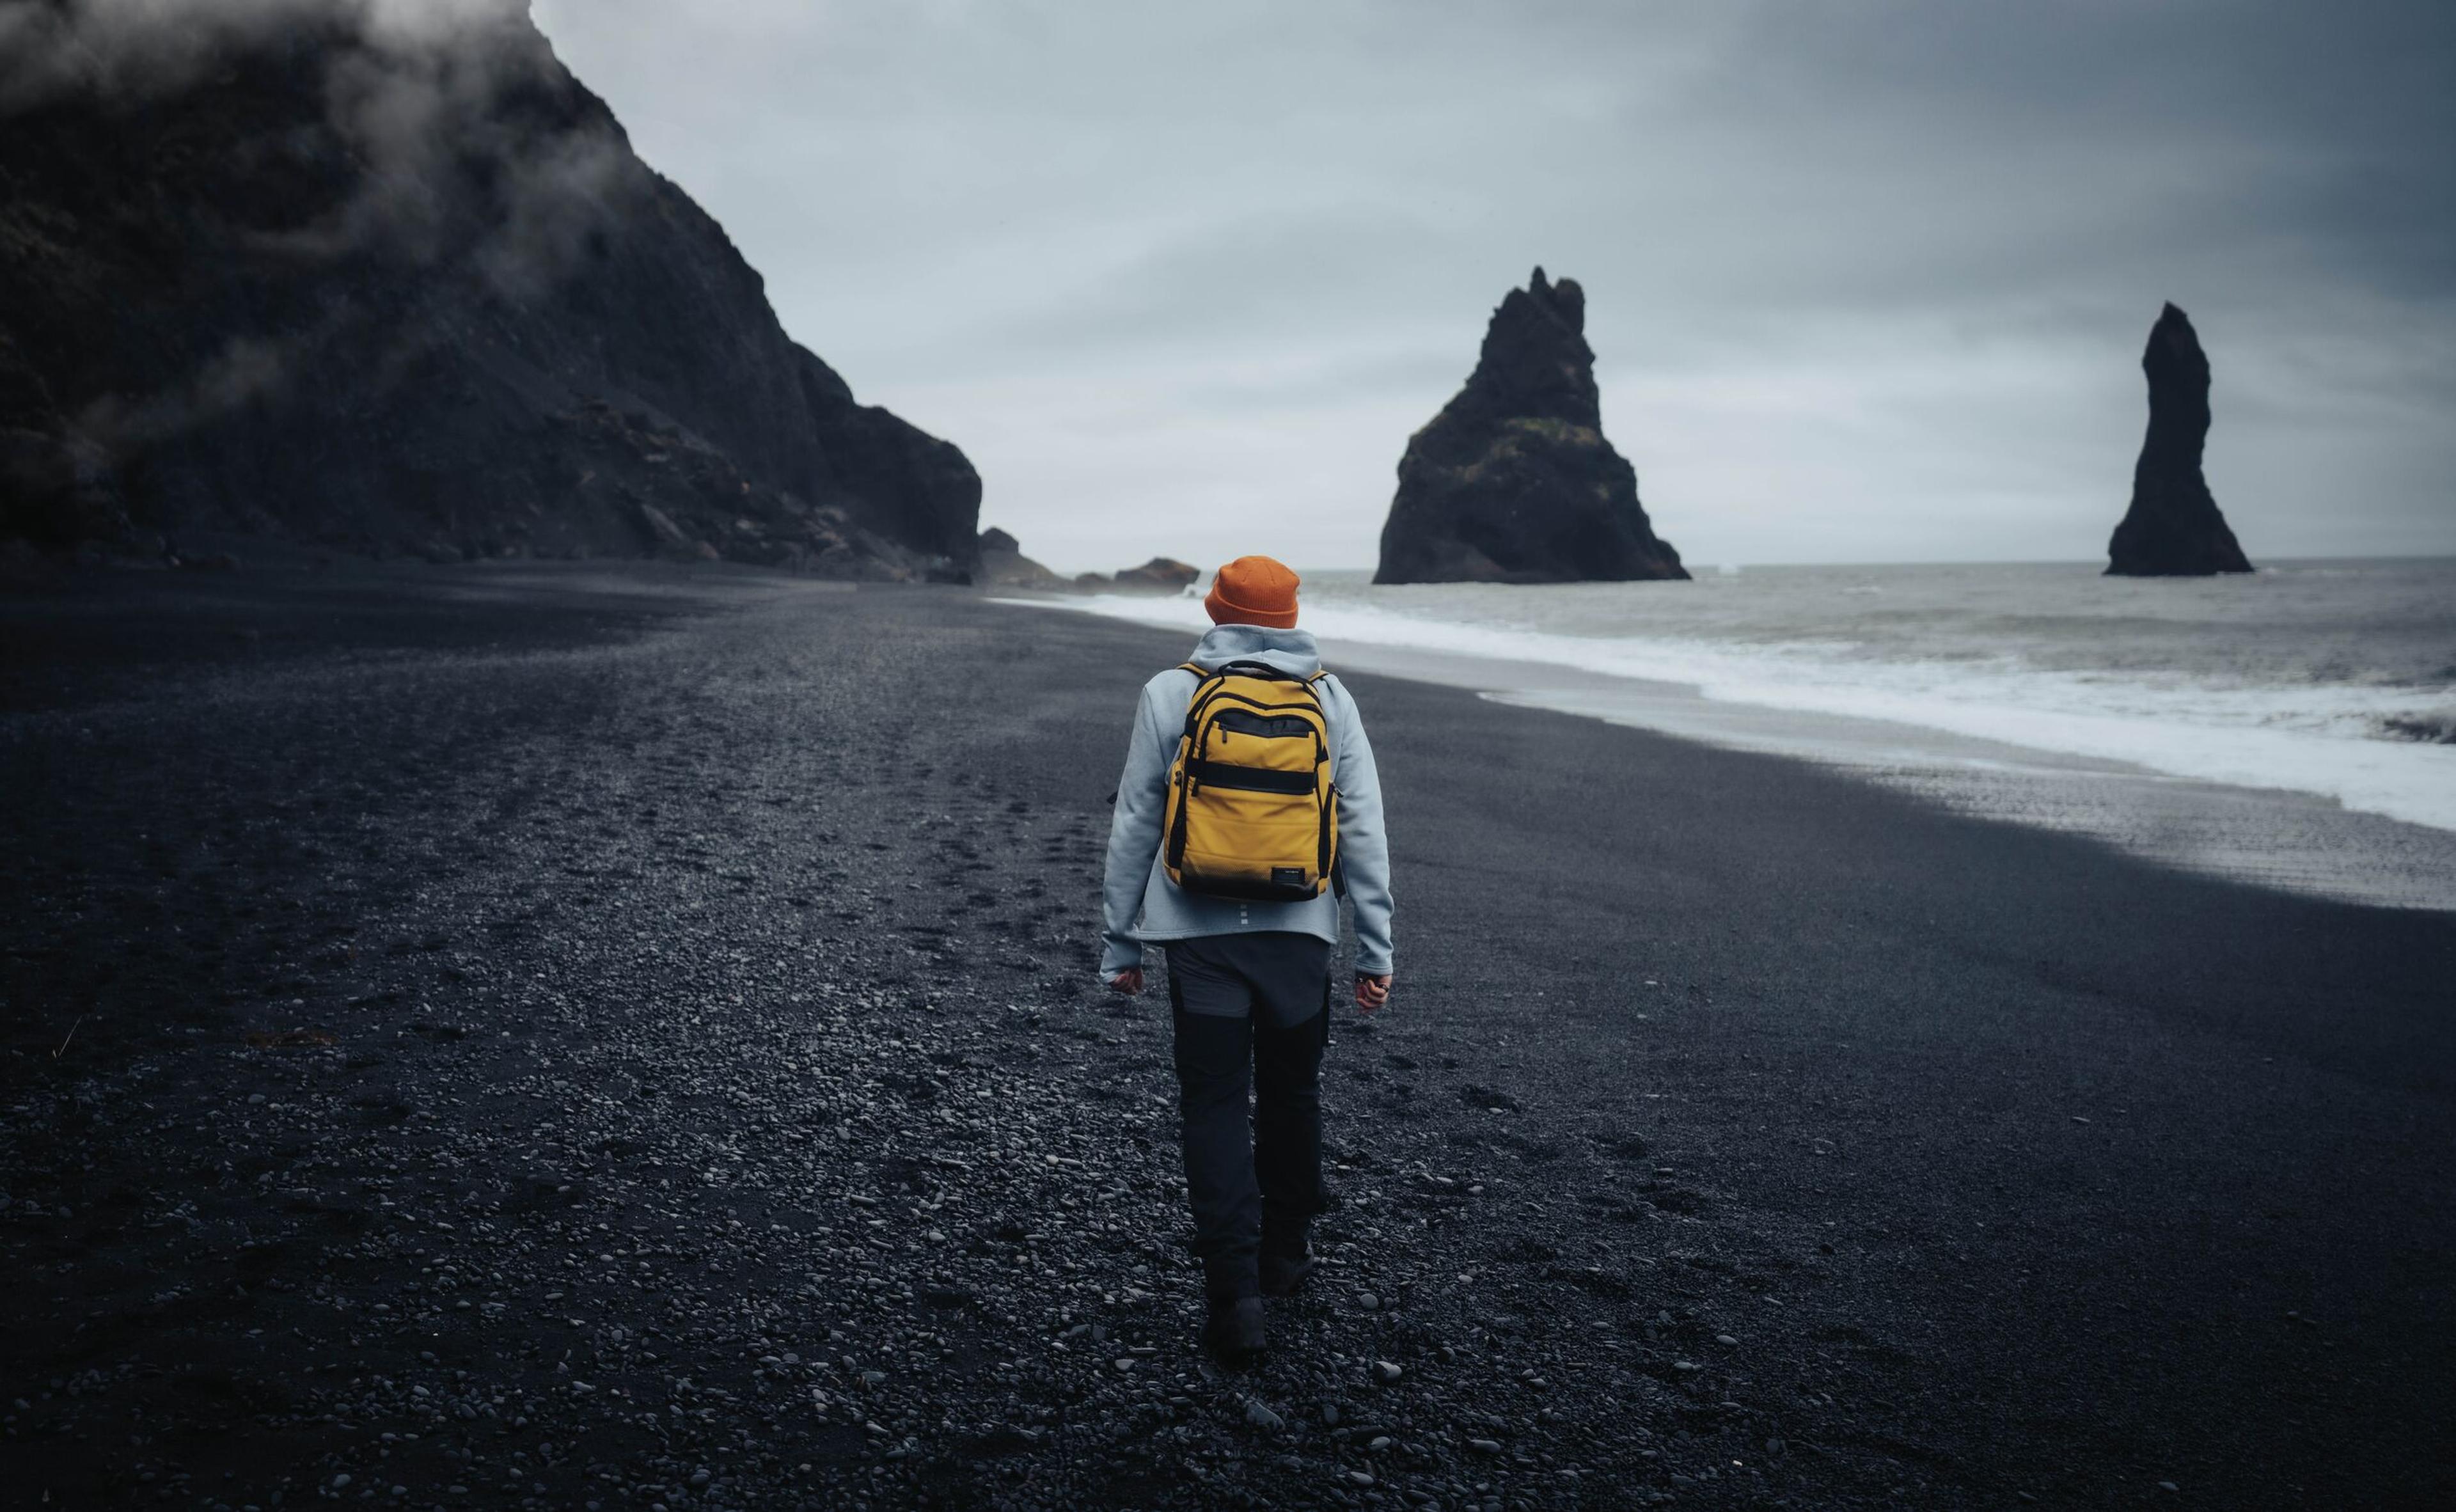 A person with a yellow backpack strolling on a black sand beach, heading towards the sea stacks in the distance.